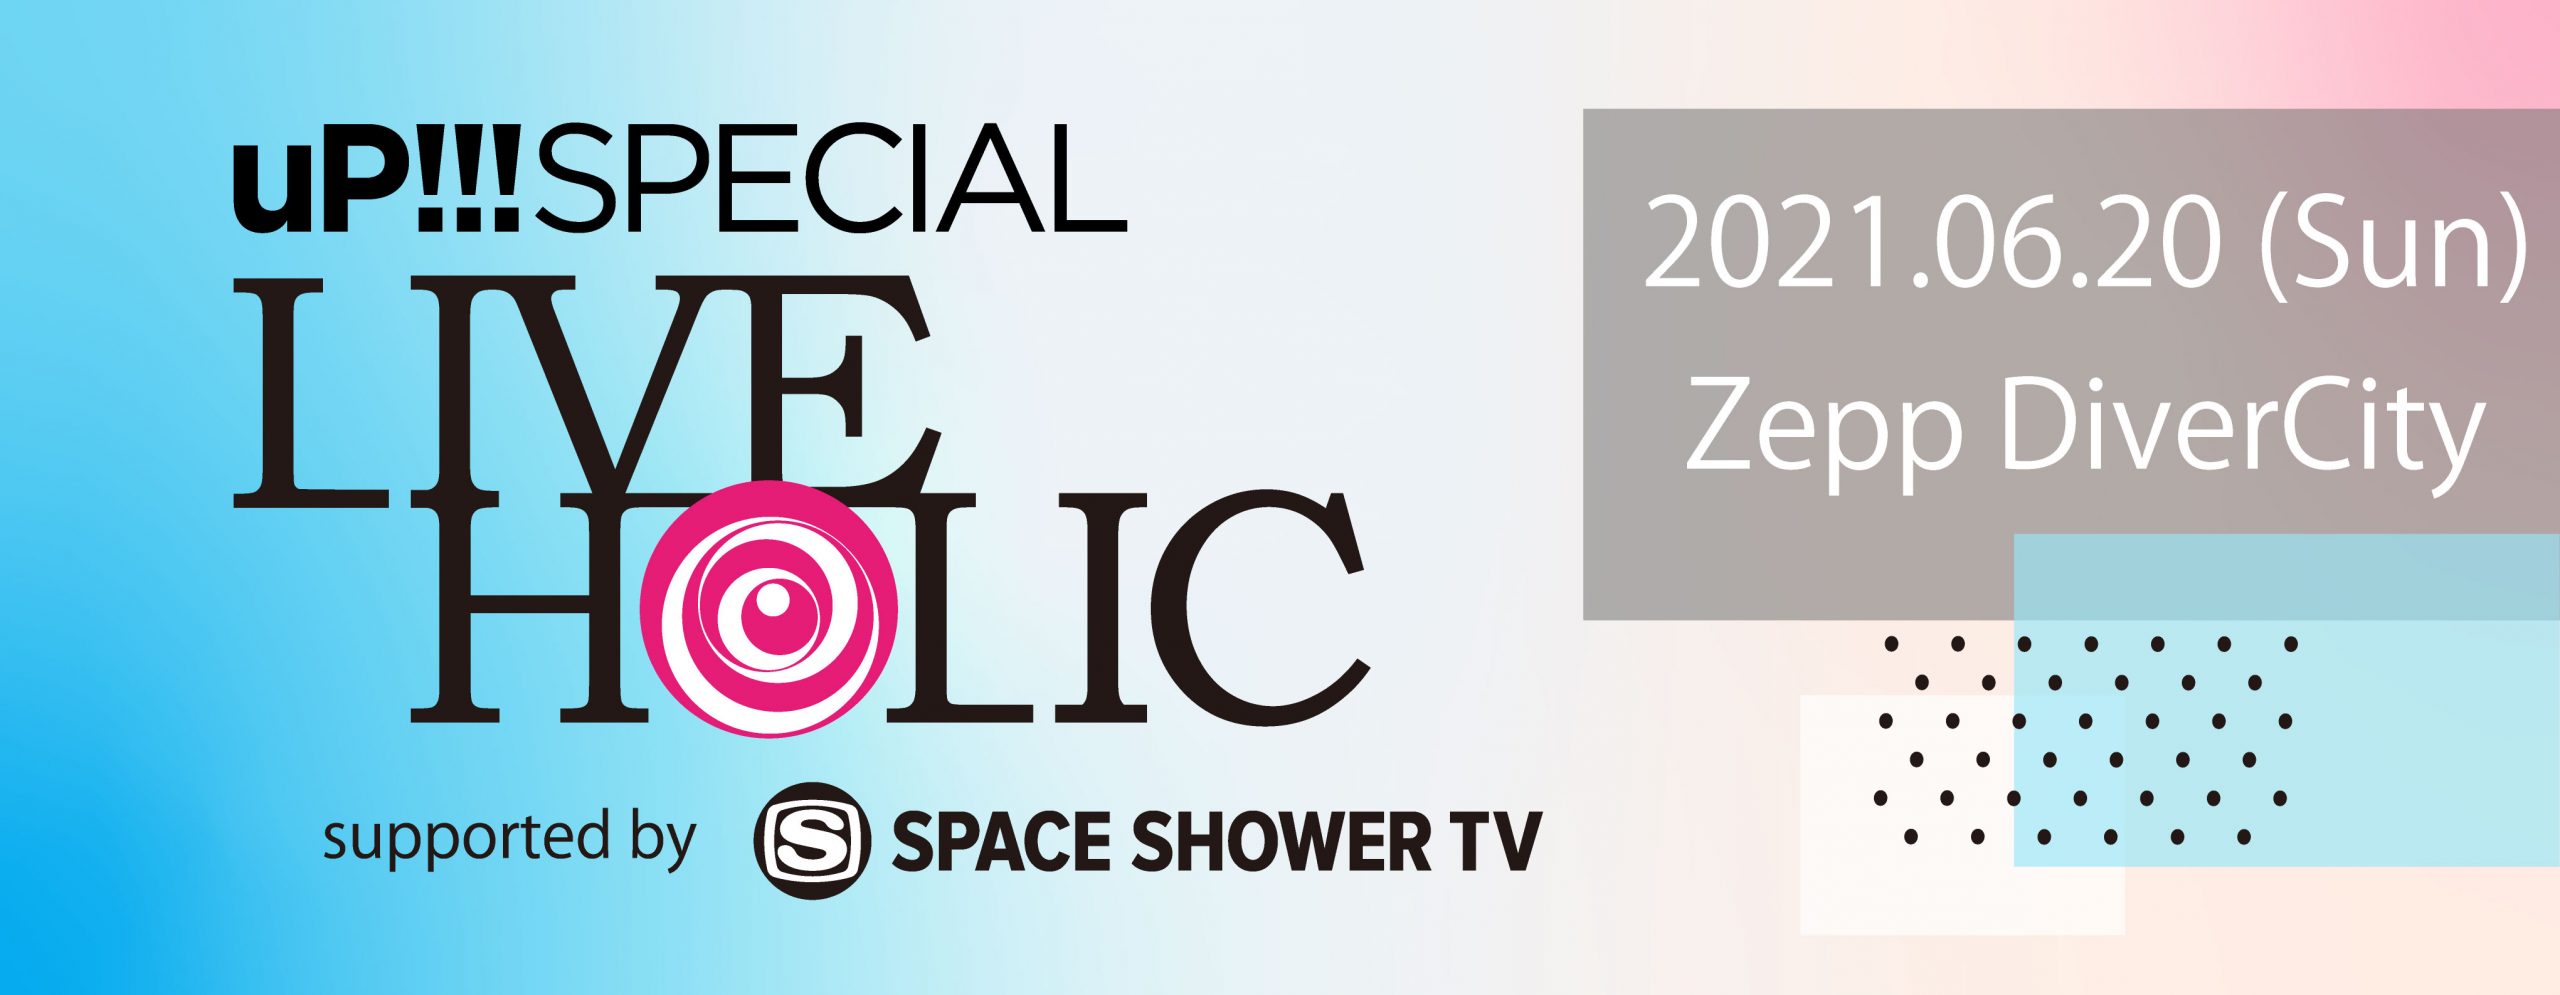 uP!!! SPECIAL LIVE HOLIC vol.31 supported by SPACE SHOWER TV